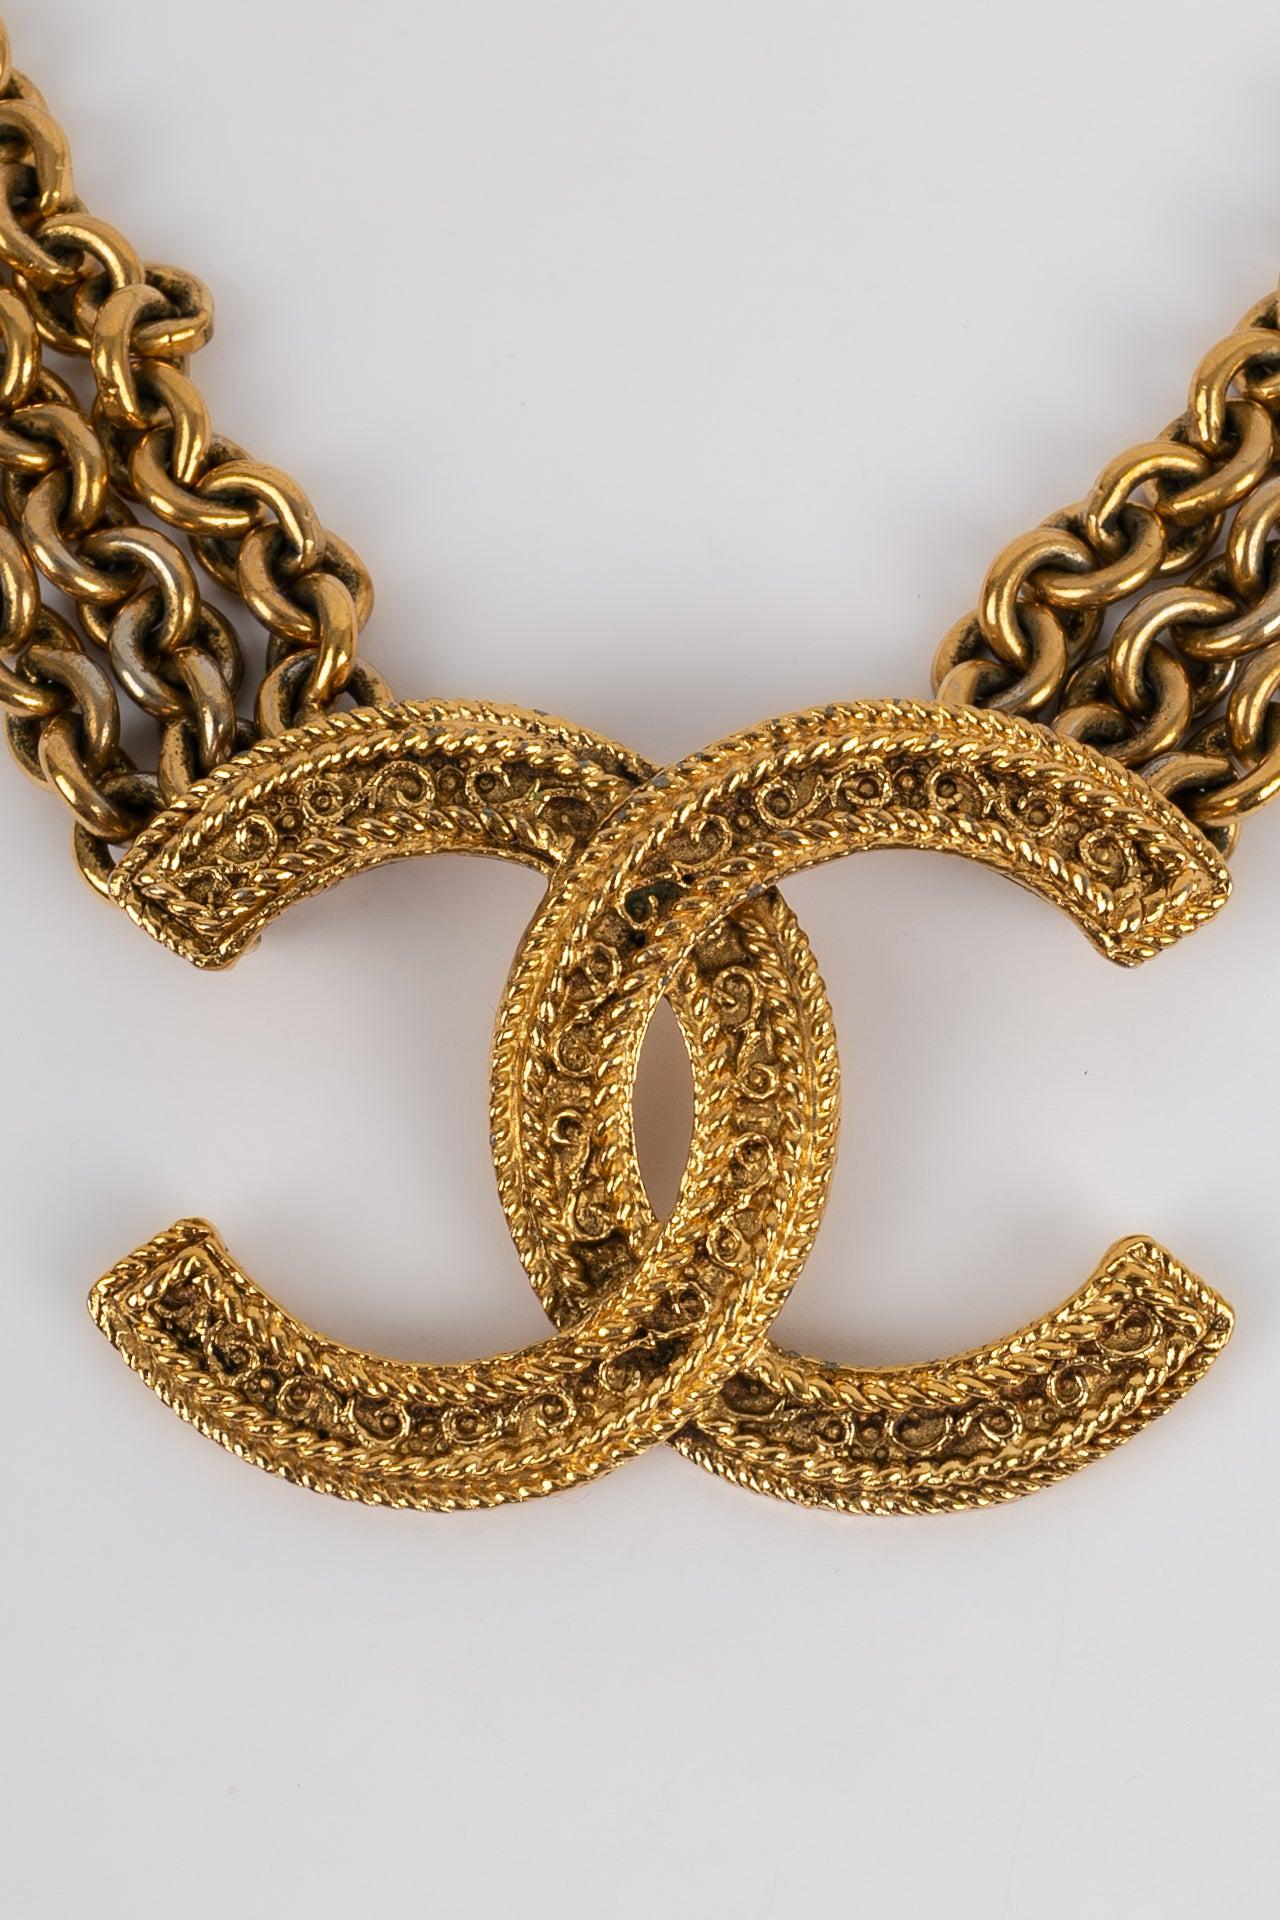 Chanel Necklace in Three Gold Metal Chains with Central CC Pendant For Sale 1